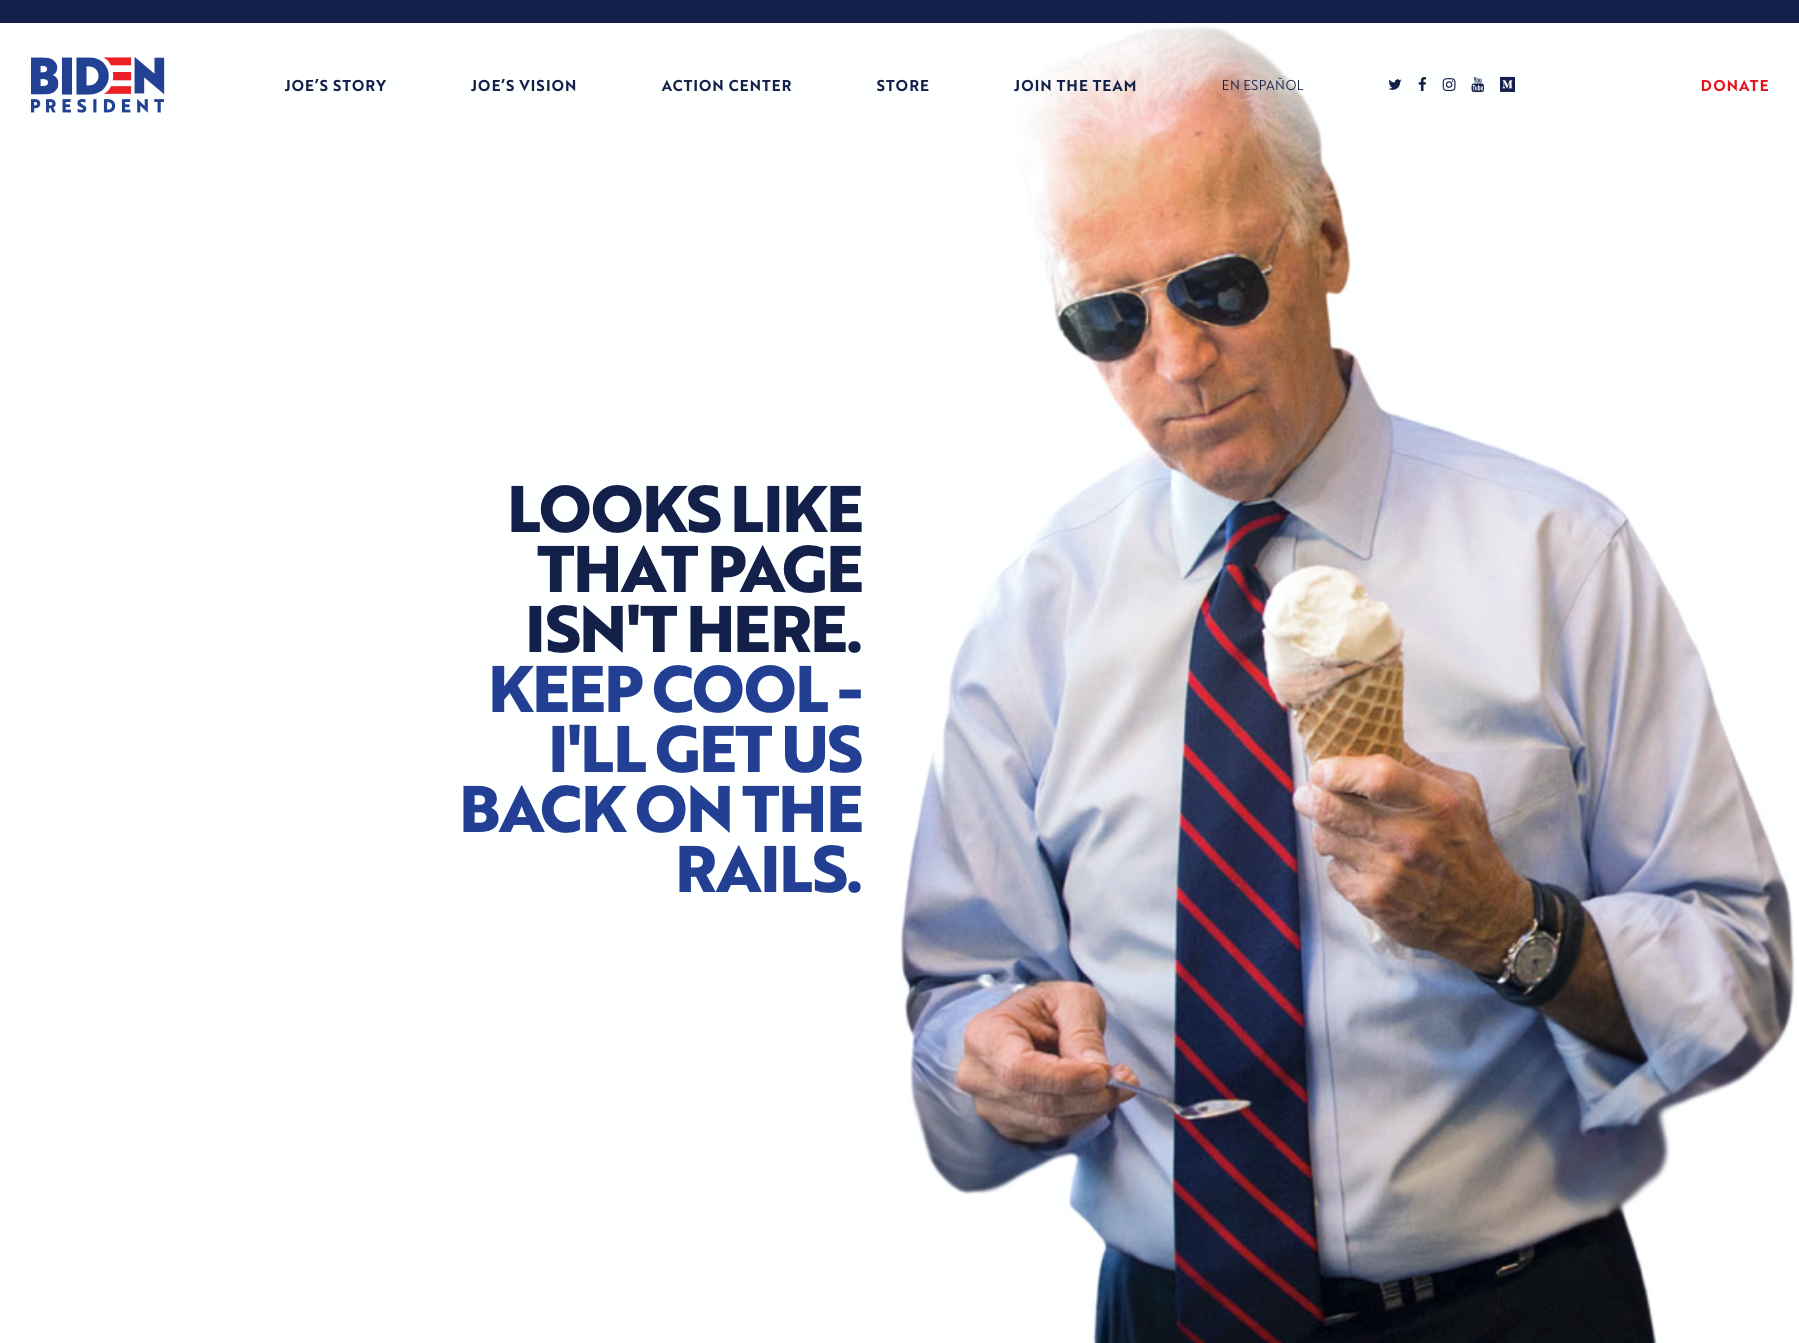 The 404 error page on the Biden Campaign website is in keeping with the tone being put out by the Occupy Democrats group